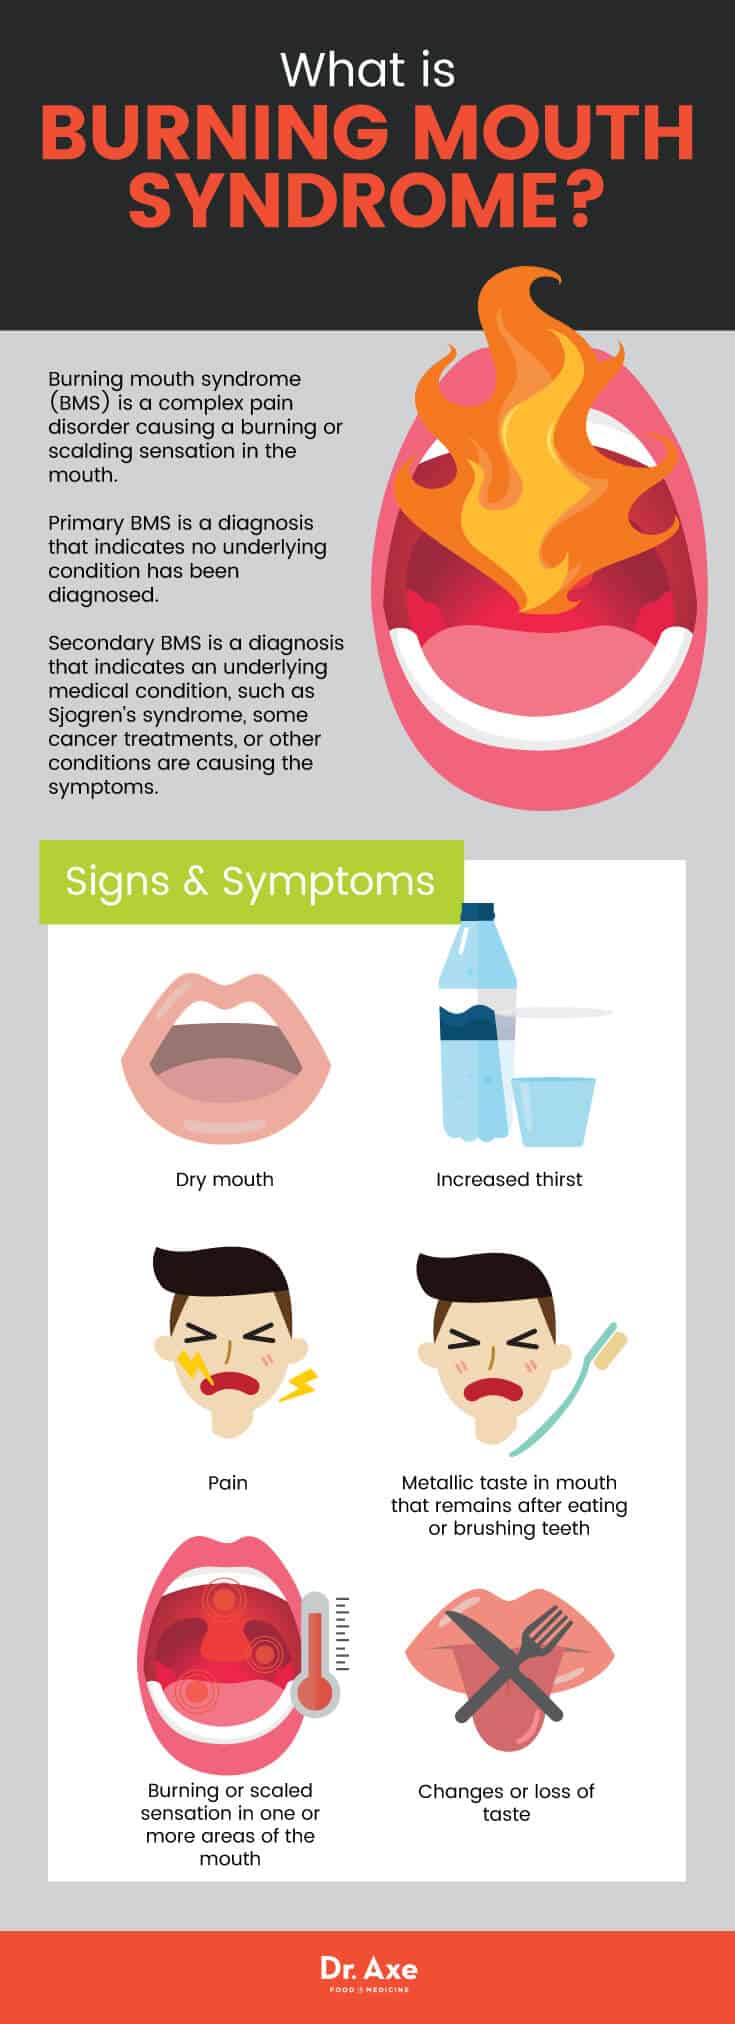 What is burning mouth syndrome? - Dr. Axe